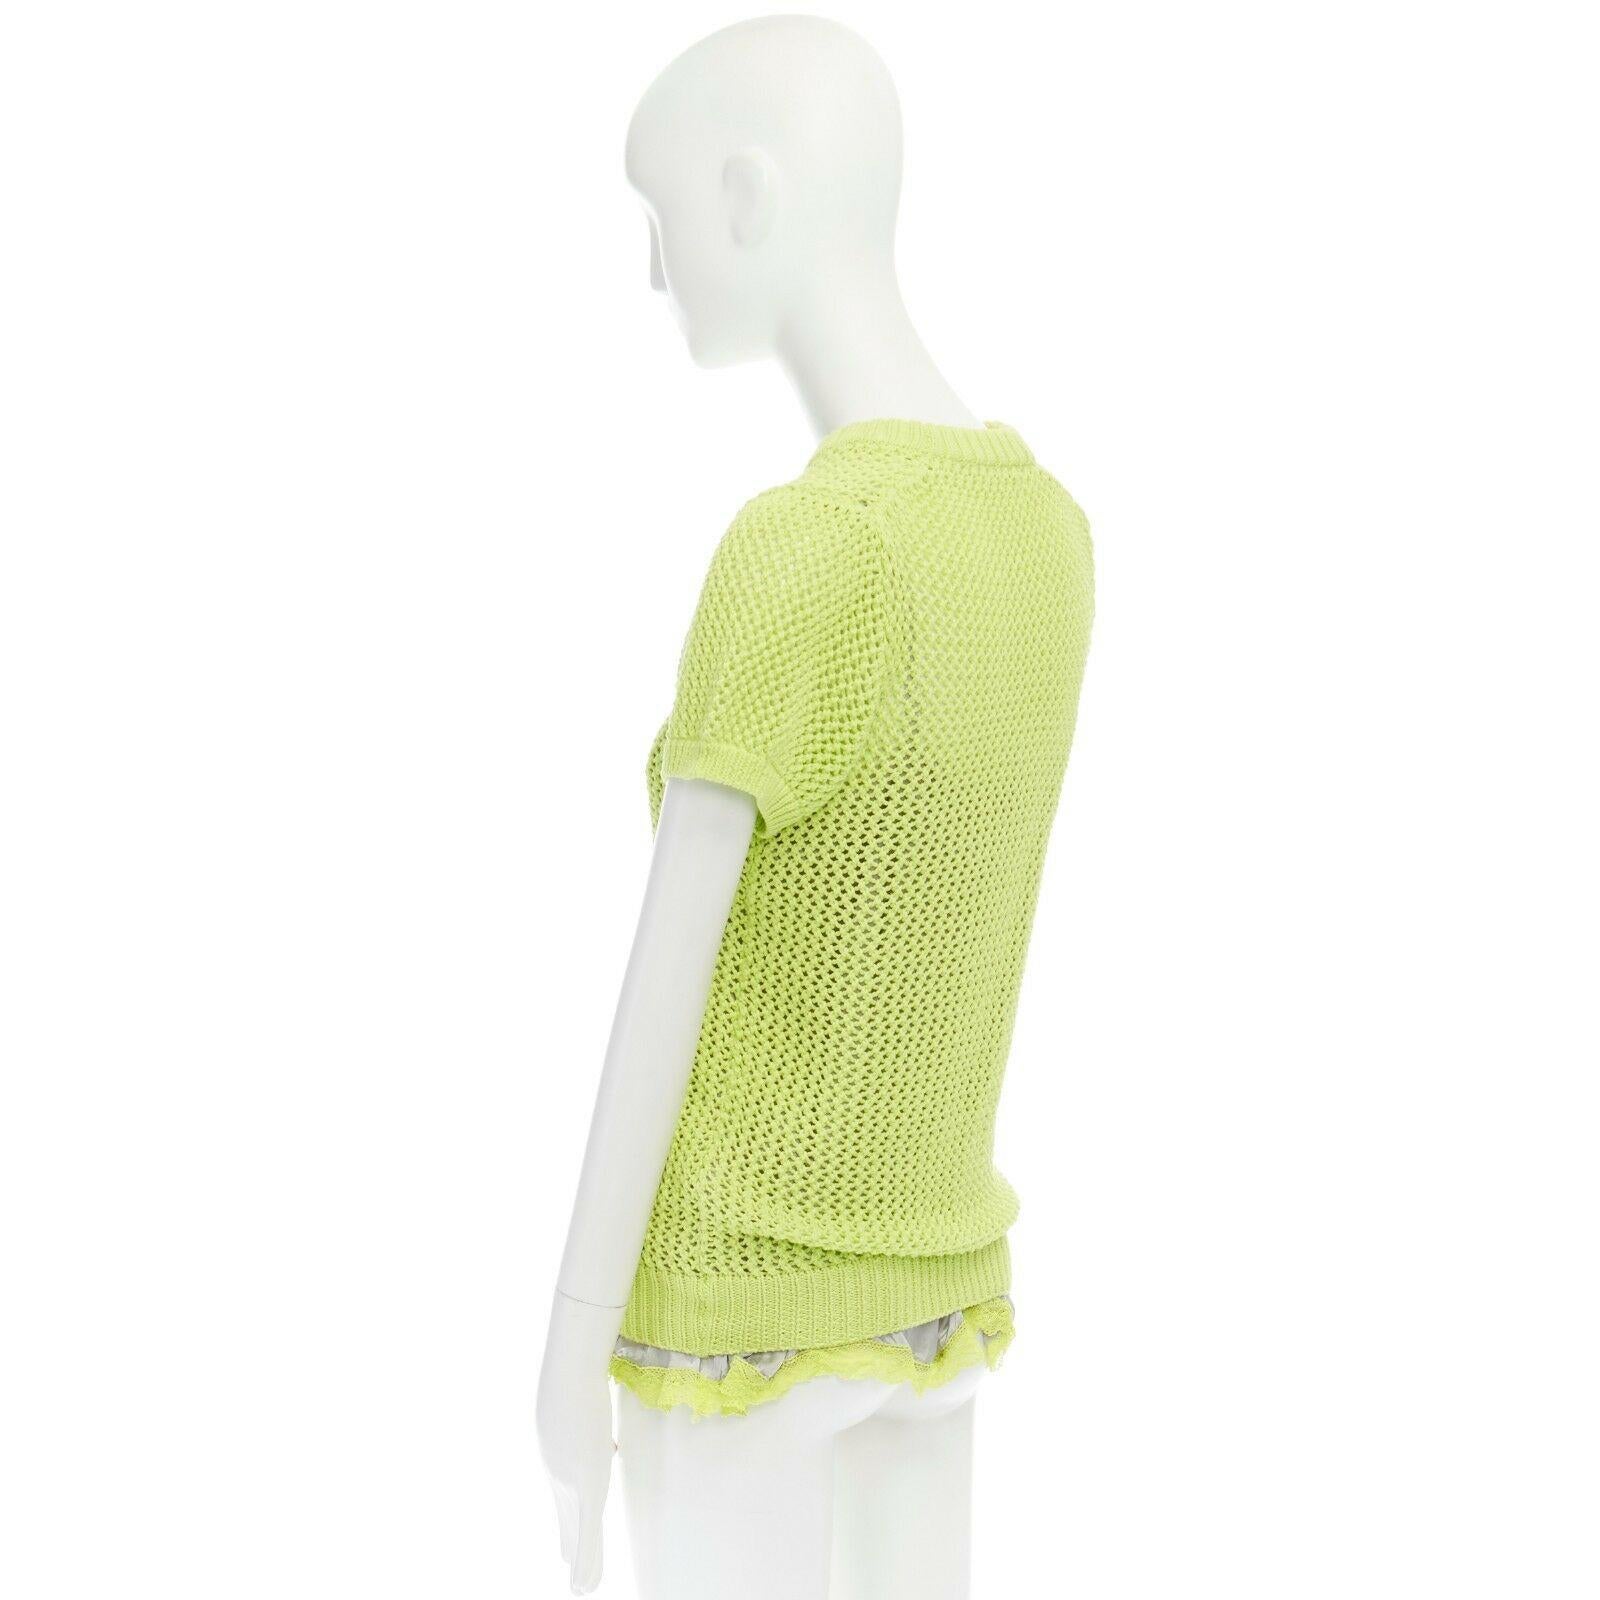 SACAI LUCK neon yellow grey lace trimmed camisole crochet knit sweater top JP3 L 1